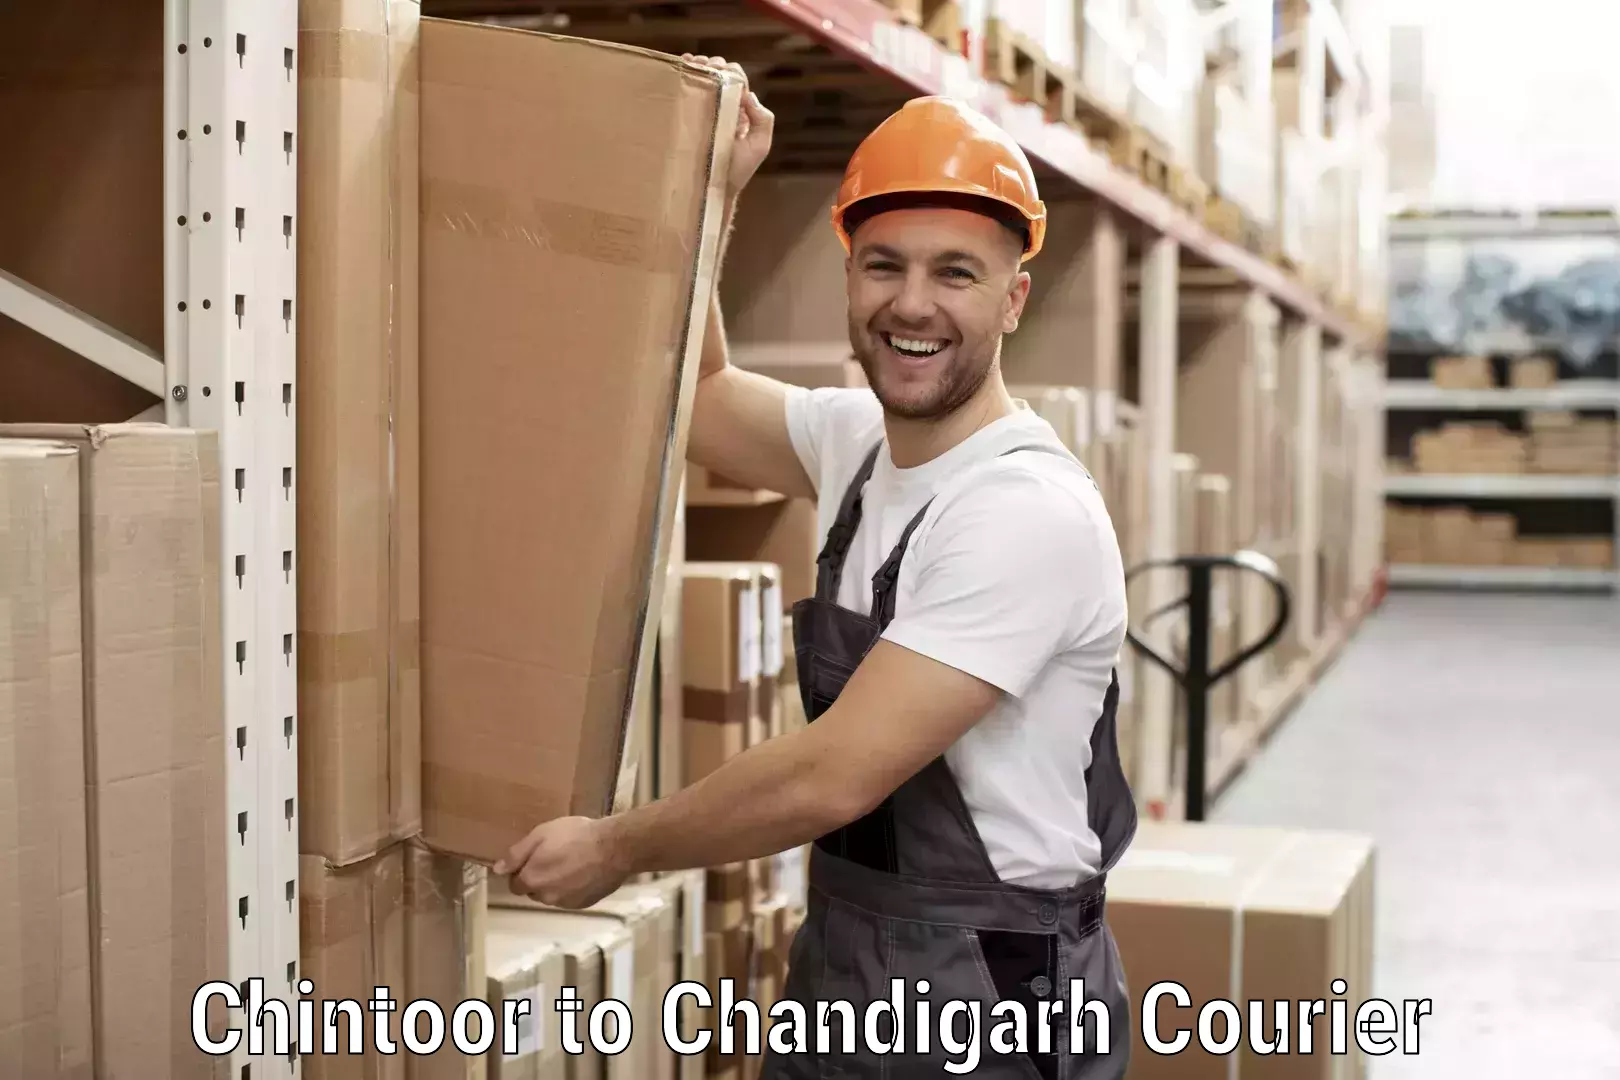 Reliable courier service Chintoor to Chandigarh